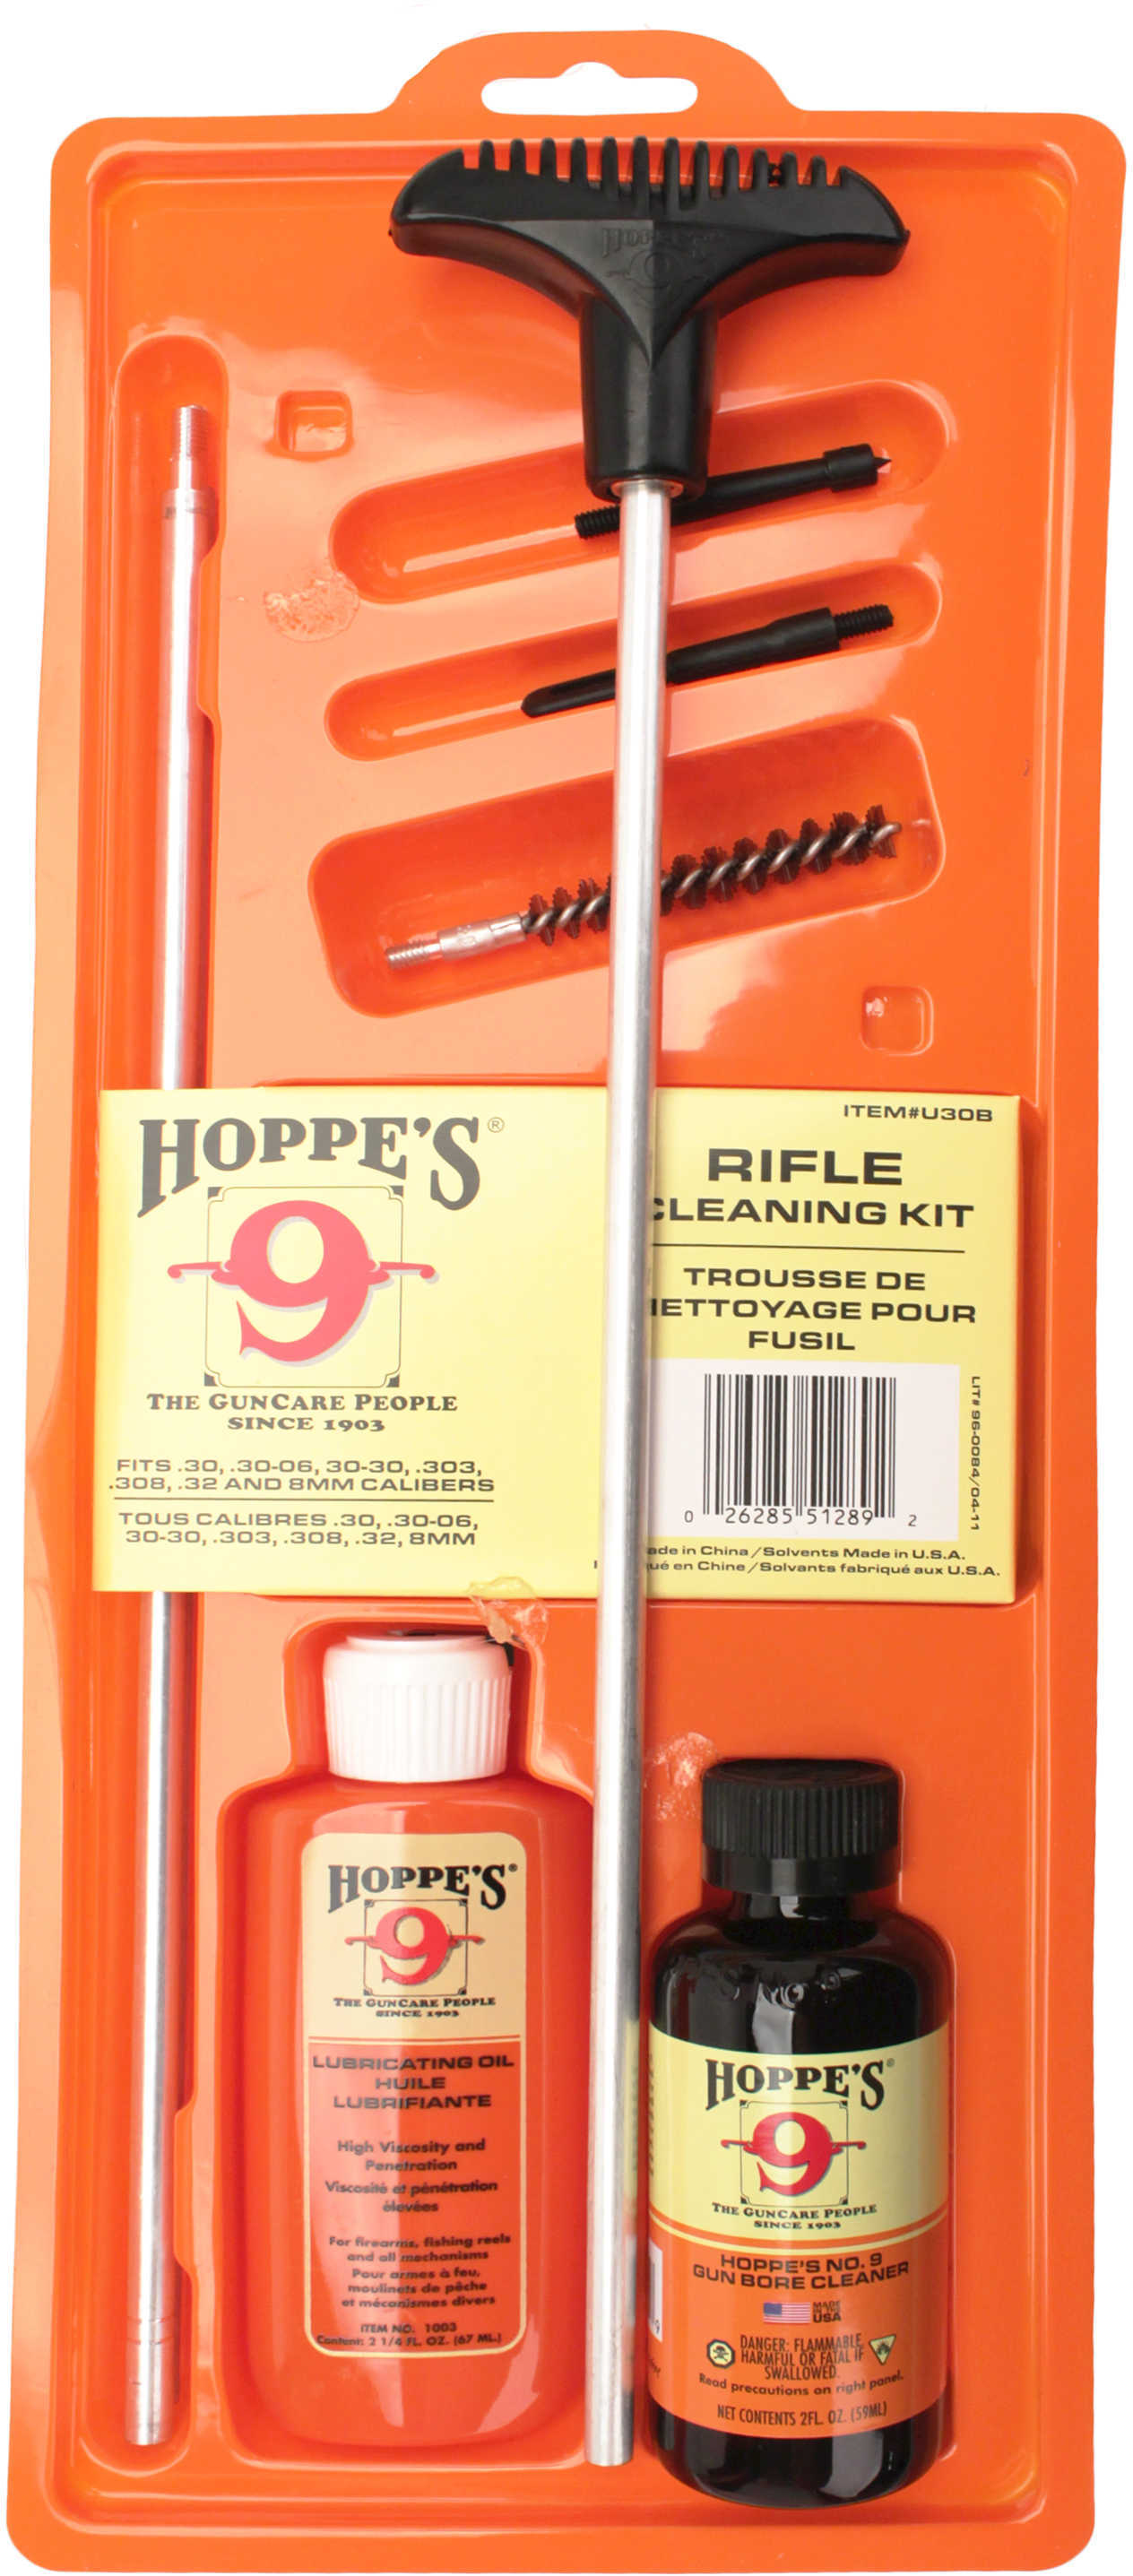 Hoppe's Rifle Cleaning Kit 30-32 Cal, 8mm Clamshell